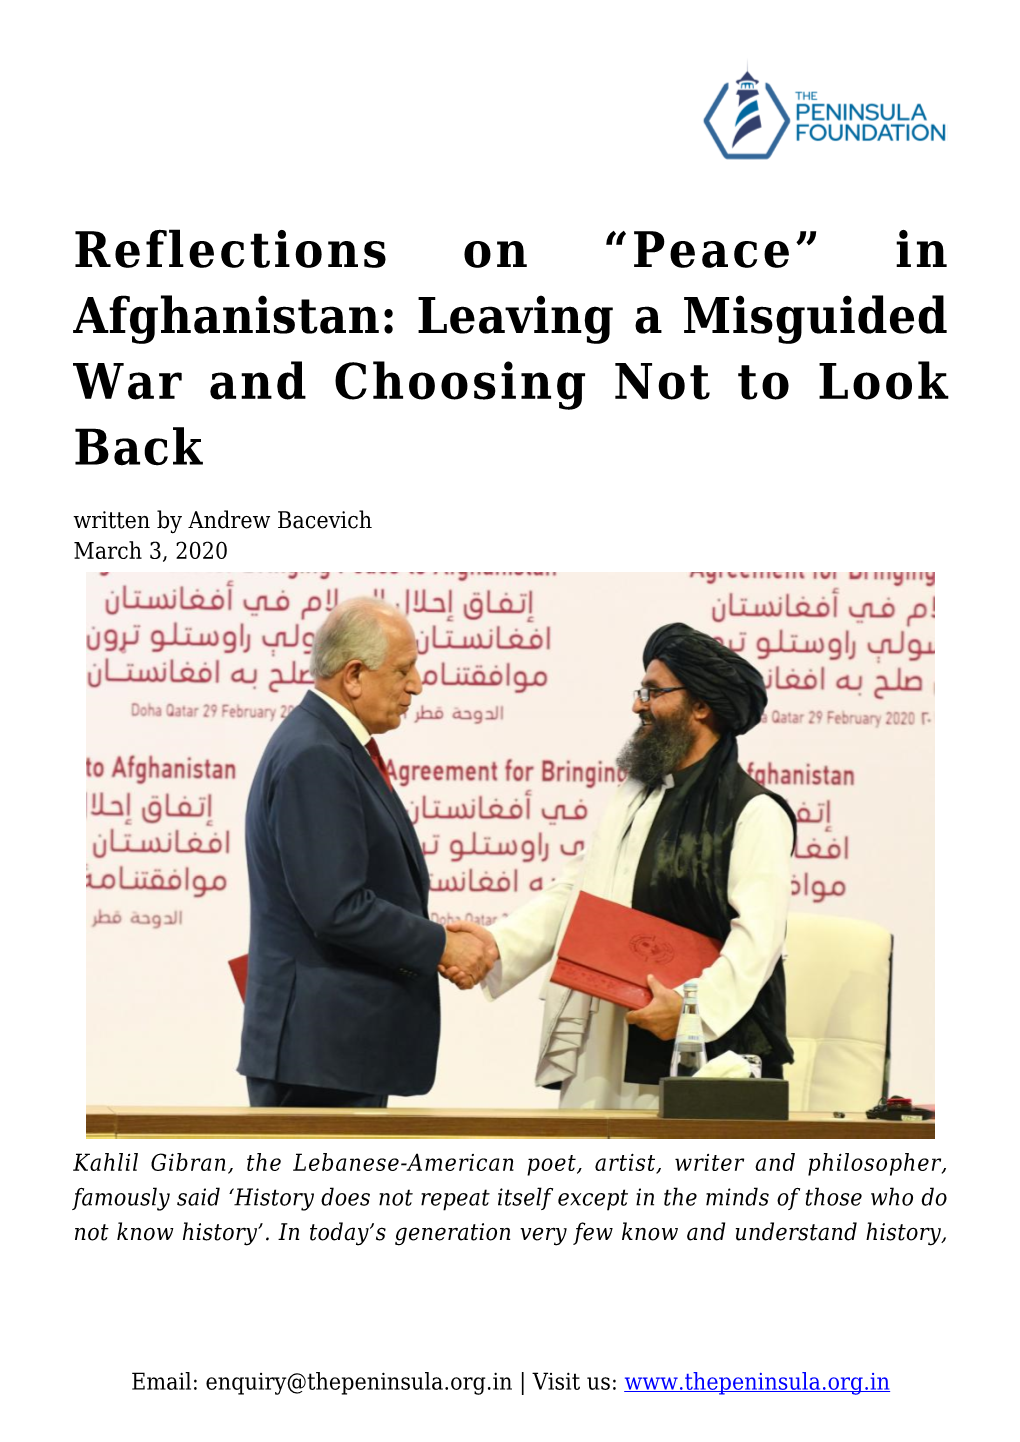 Reflections on “Peace” in Afghanistan: Leaving a Misguided War and Choosing Not to Look Back Written by Andrew Bacevich March 3, 2020